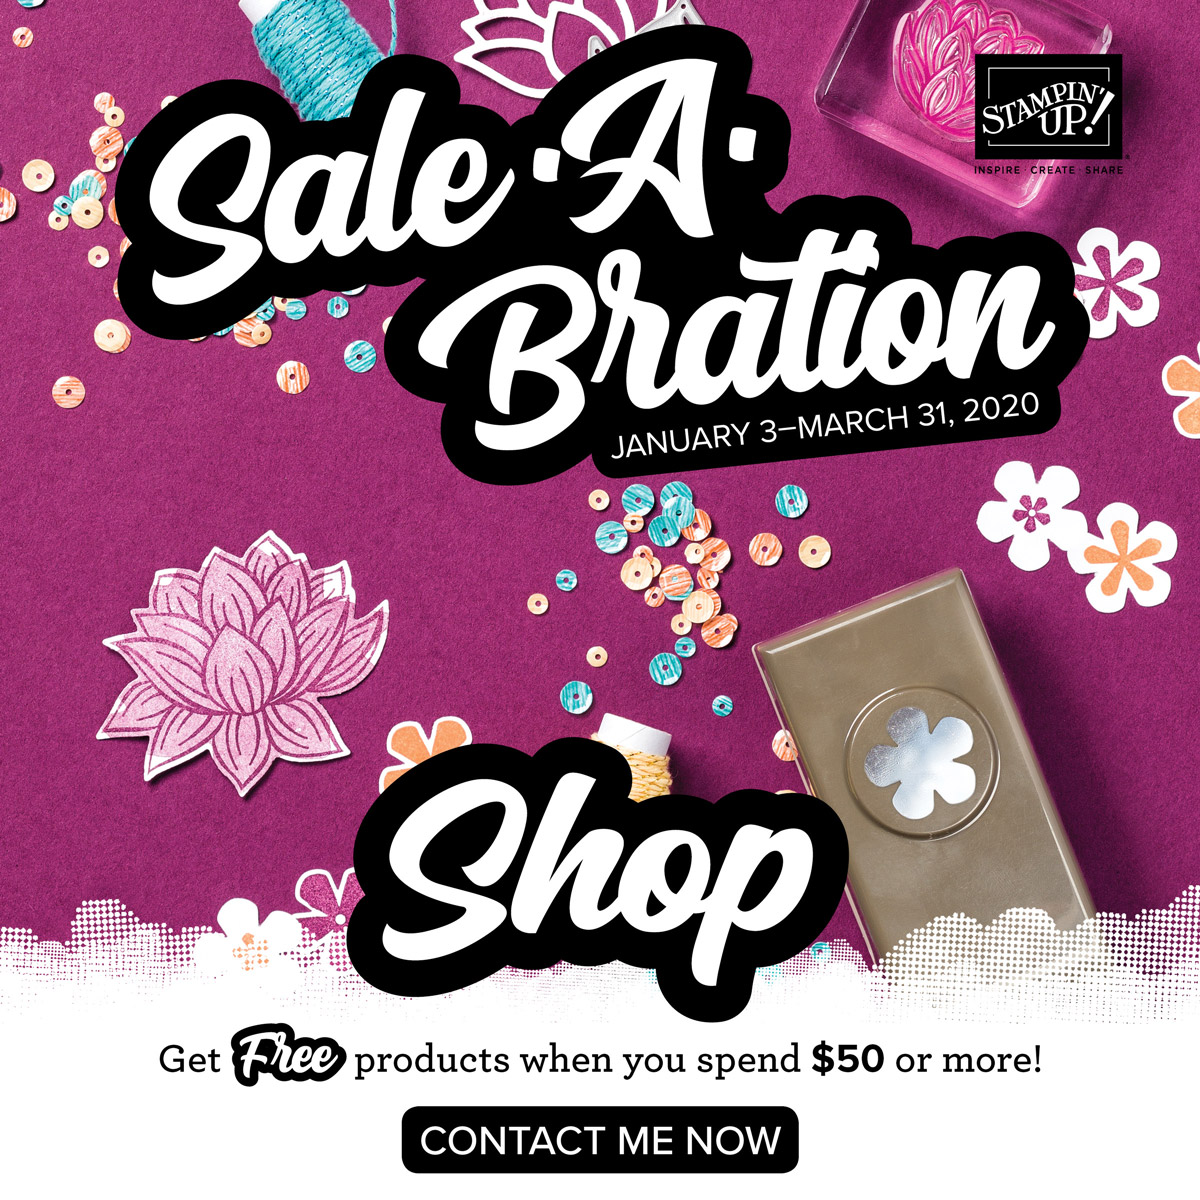 Beginning January 3, 2020 with a min. $50.00 order you can choose 1 item from the Sale-a-bration Brochure for FREE. Details on my blog here: